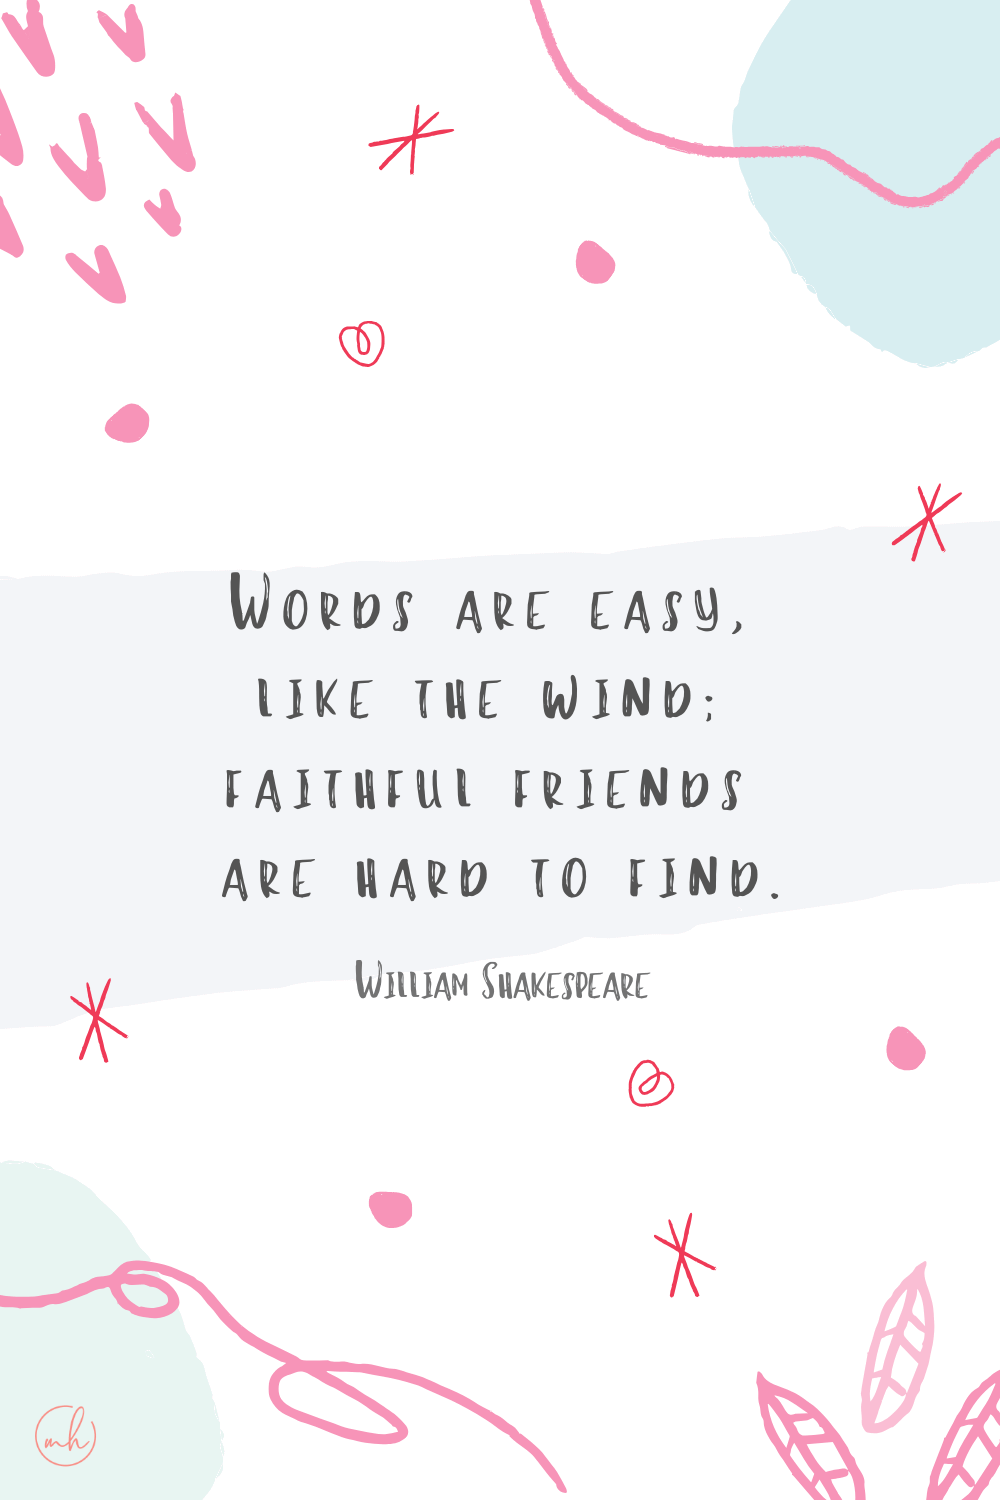 "Words are easy, like the wind; faithful friends are hard to find." - William Shakespeare